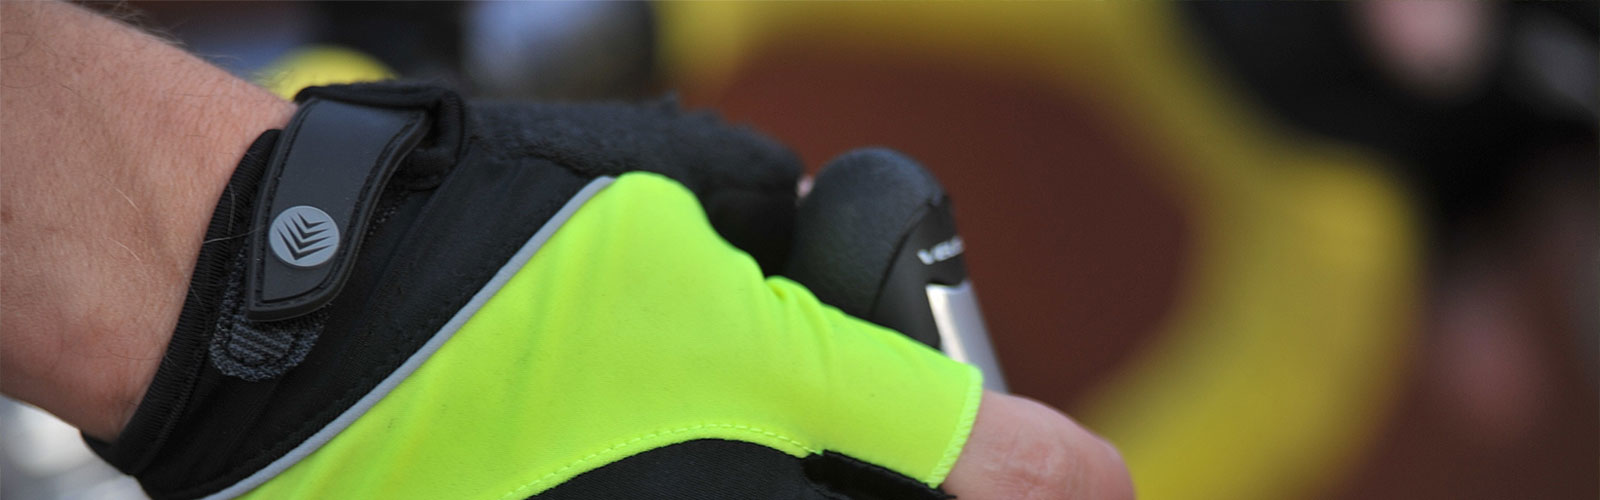 500 Winter Cycling Gloves